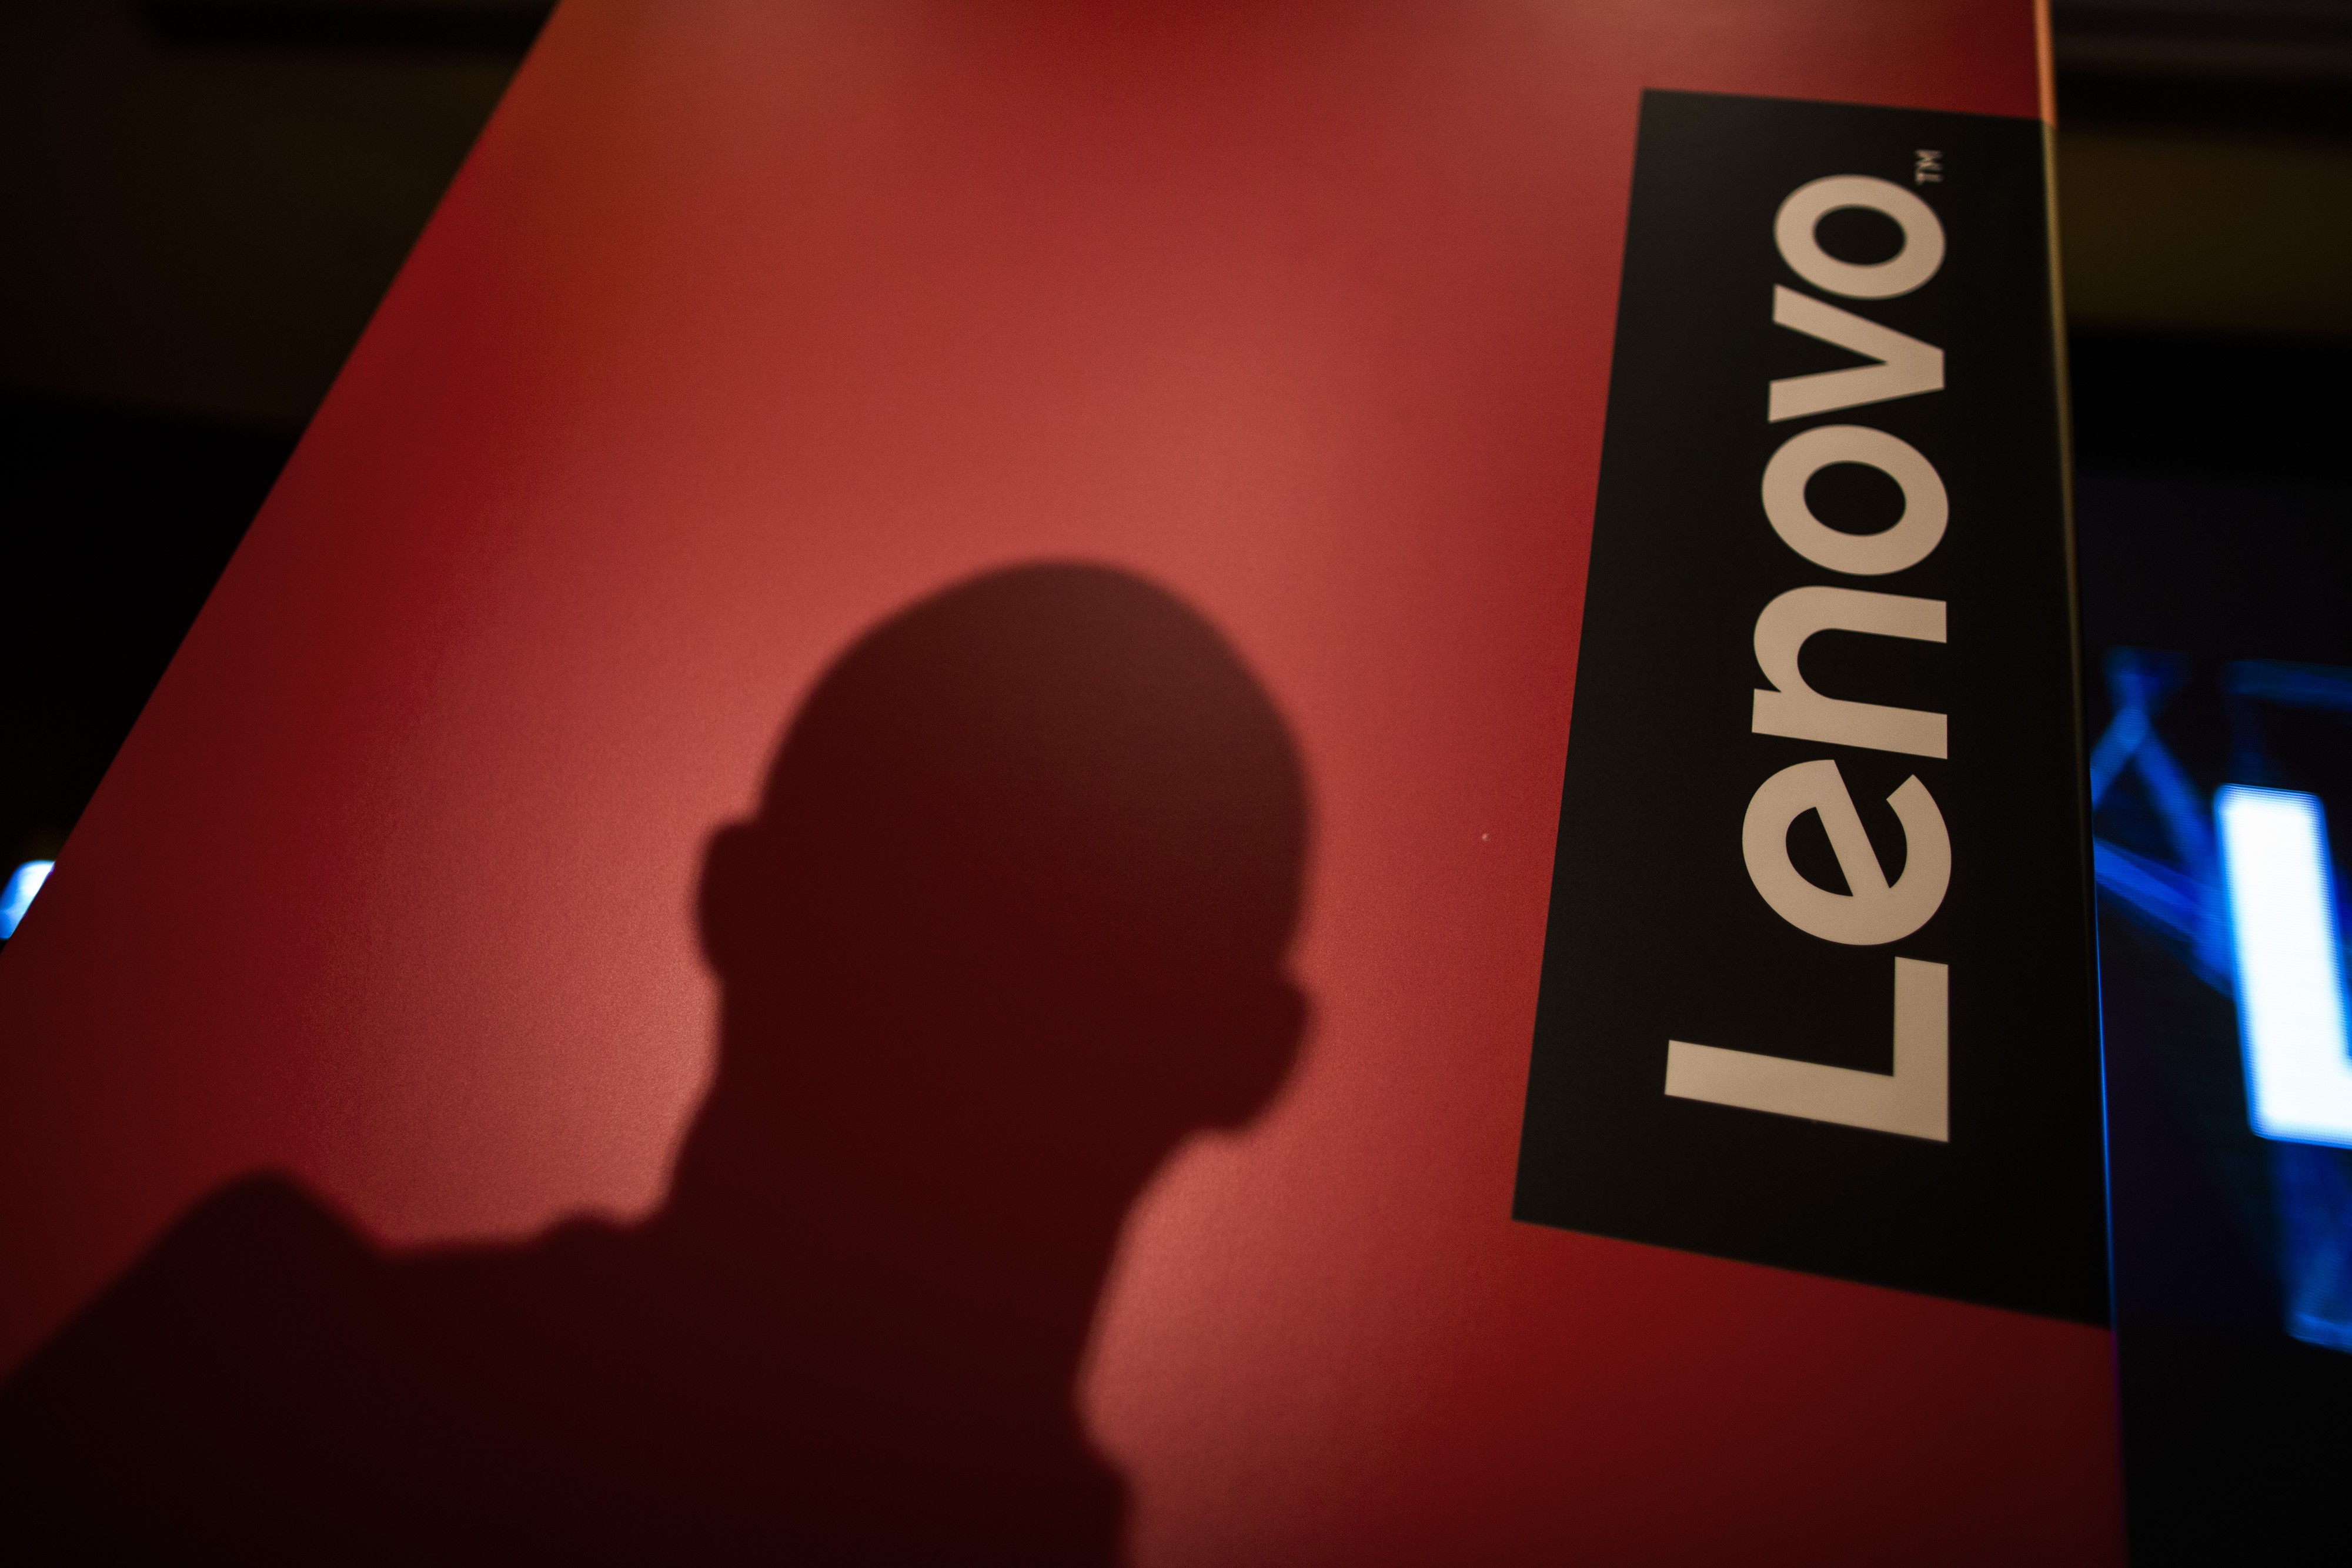 Yang Yuanqing, the chairman and chief executive of Lenovo, said China needs technology products from the US, while the US needs the mainland market and its manufacturing resources